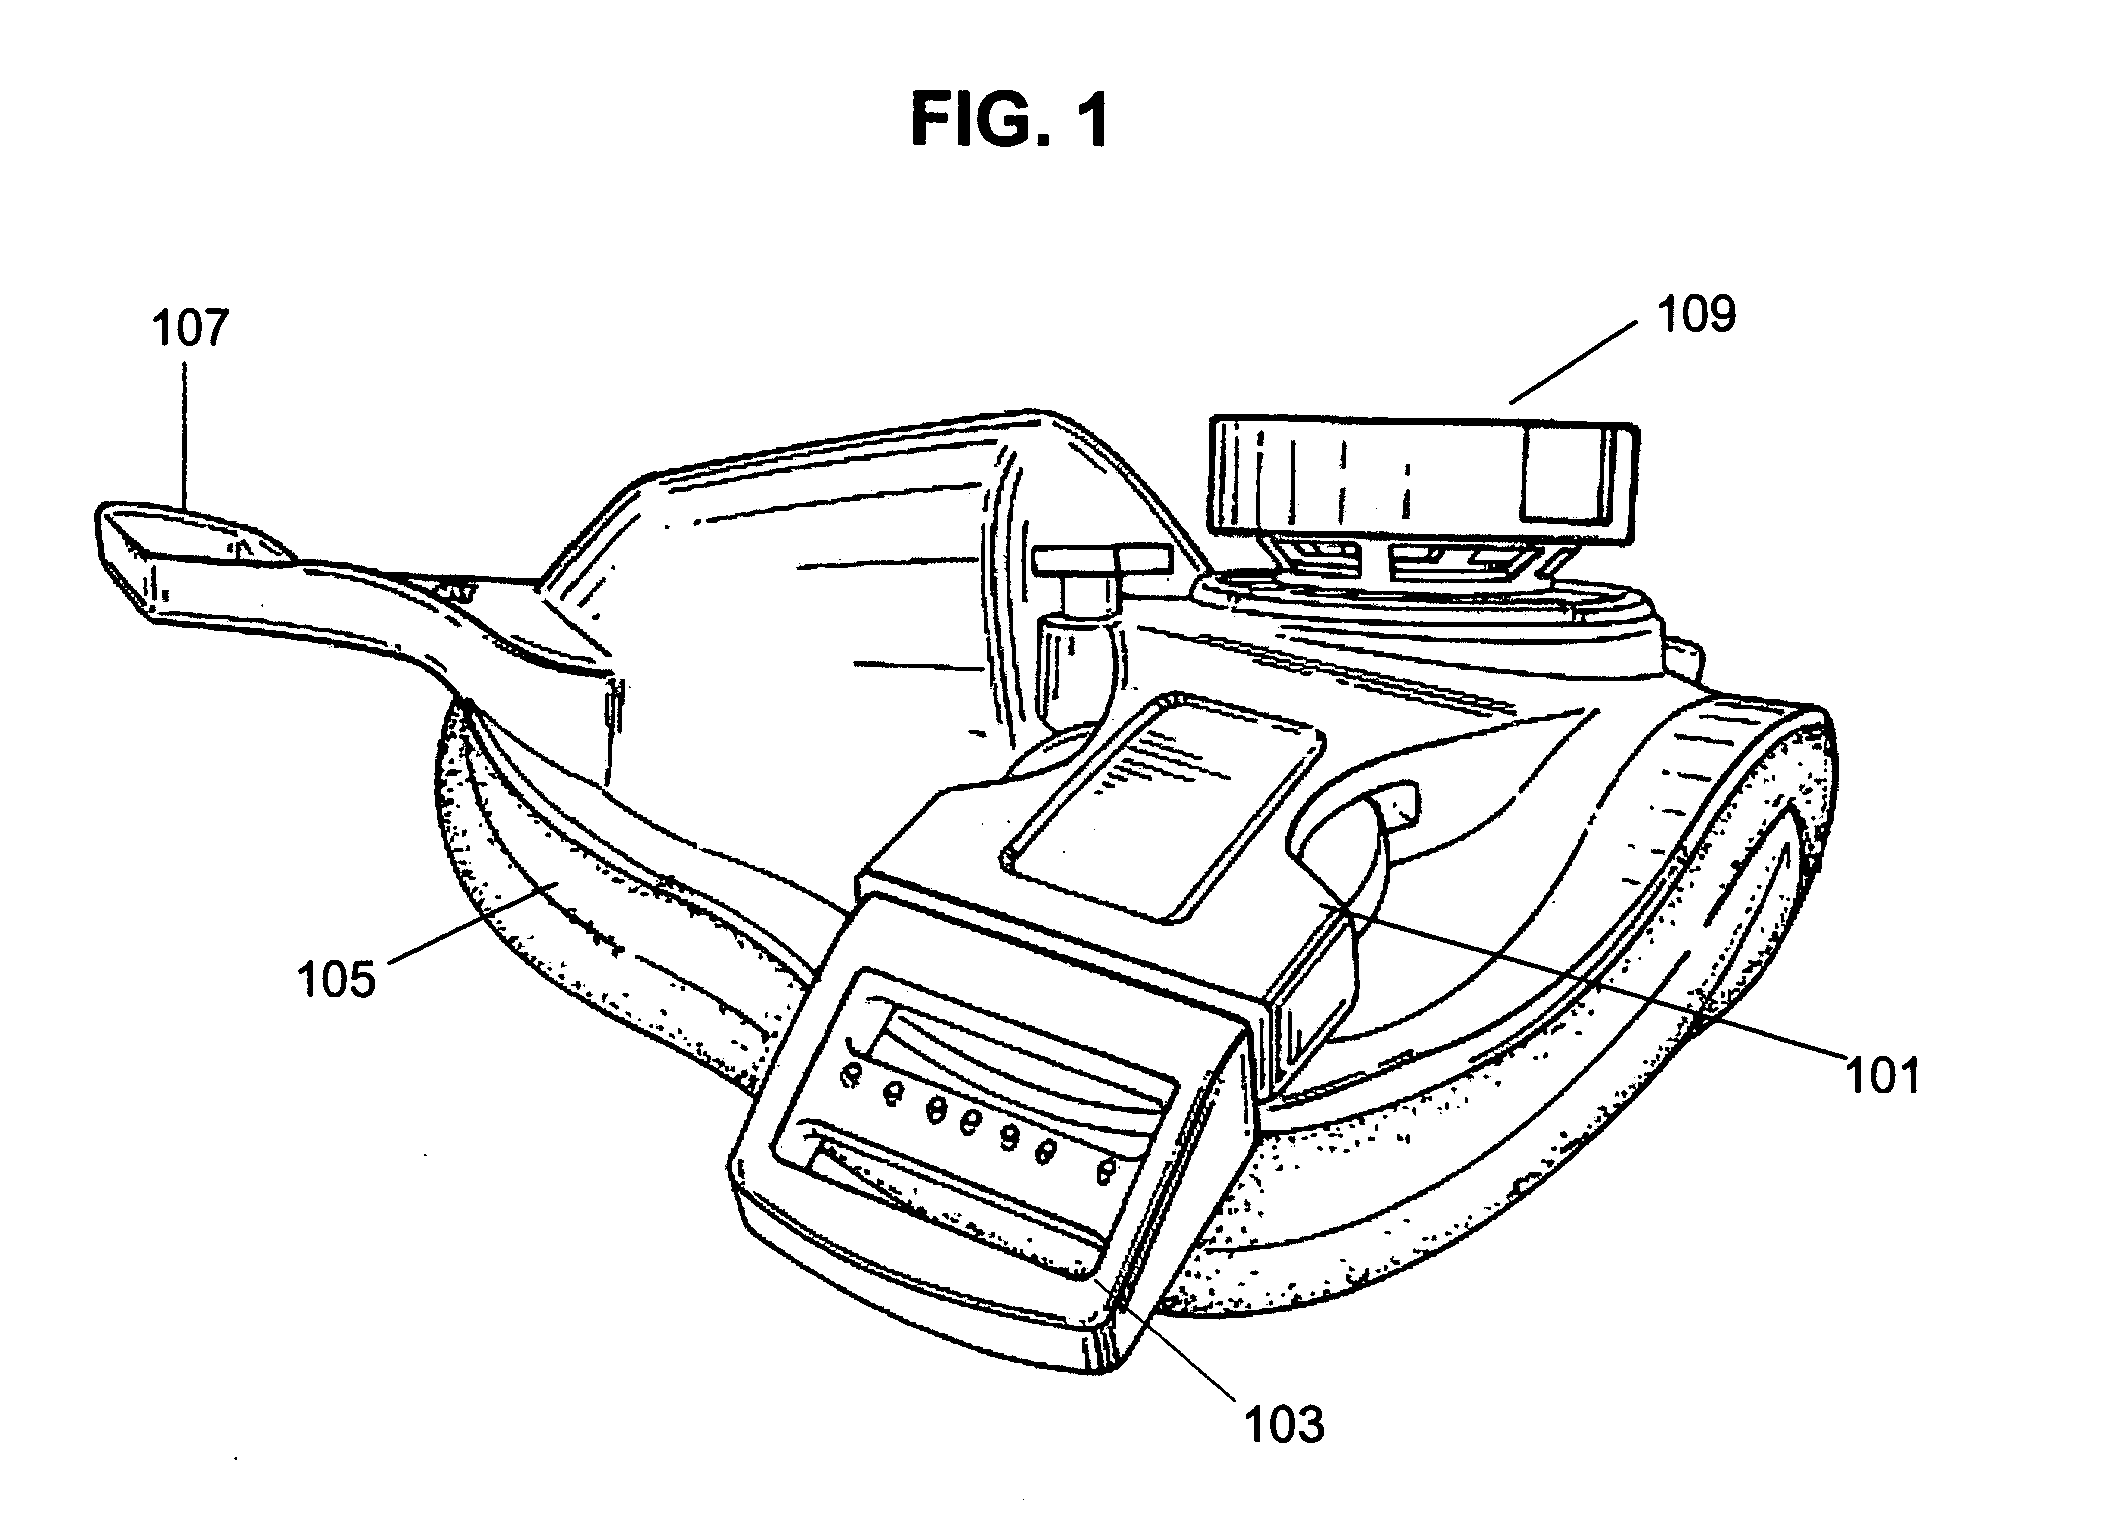 Flexible full-face mask for CPAP treatment